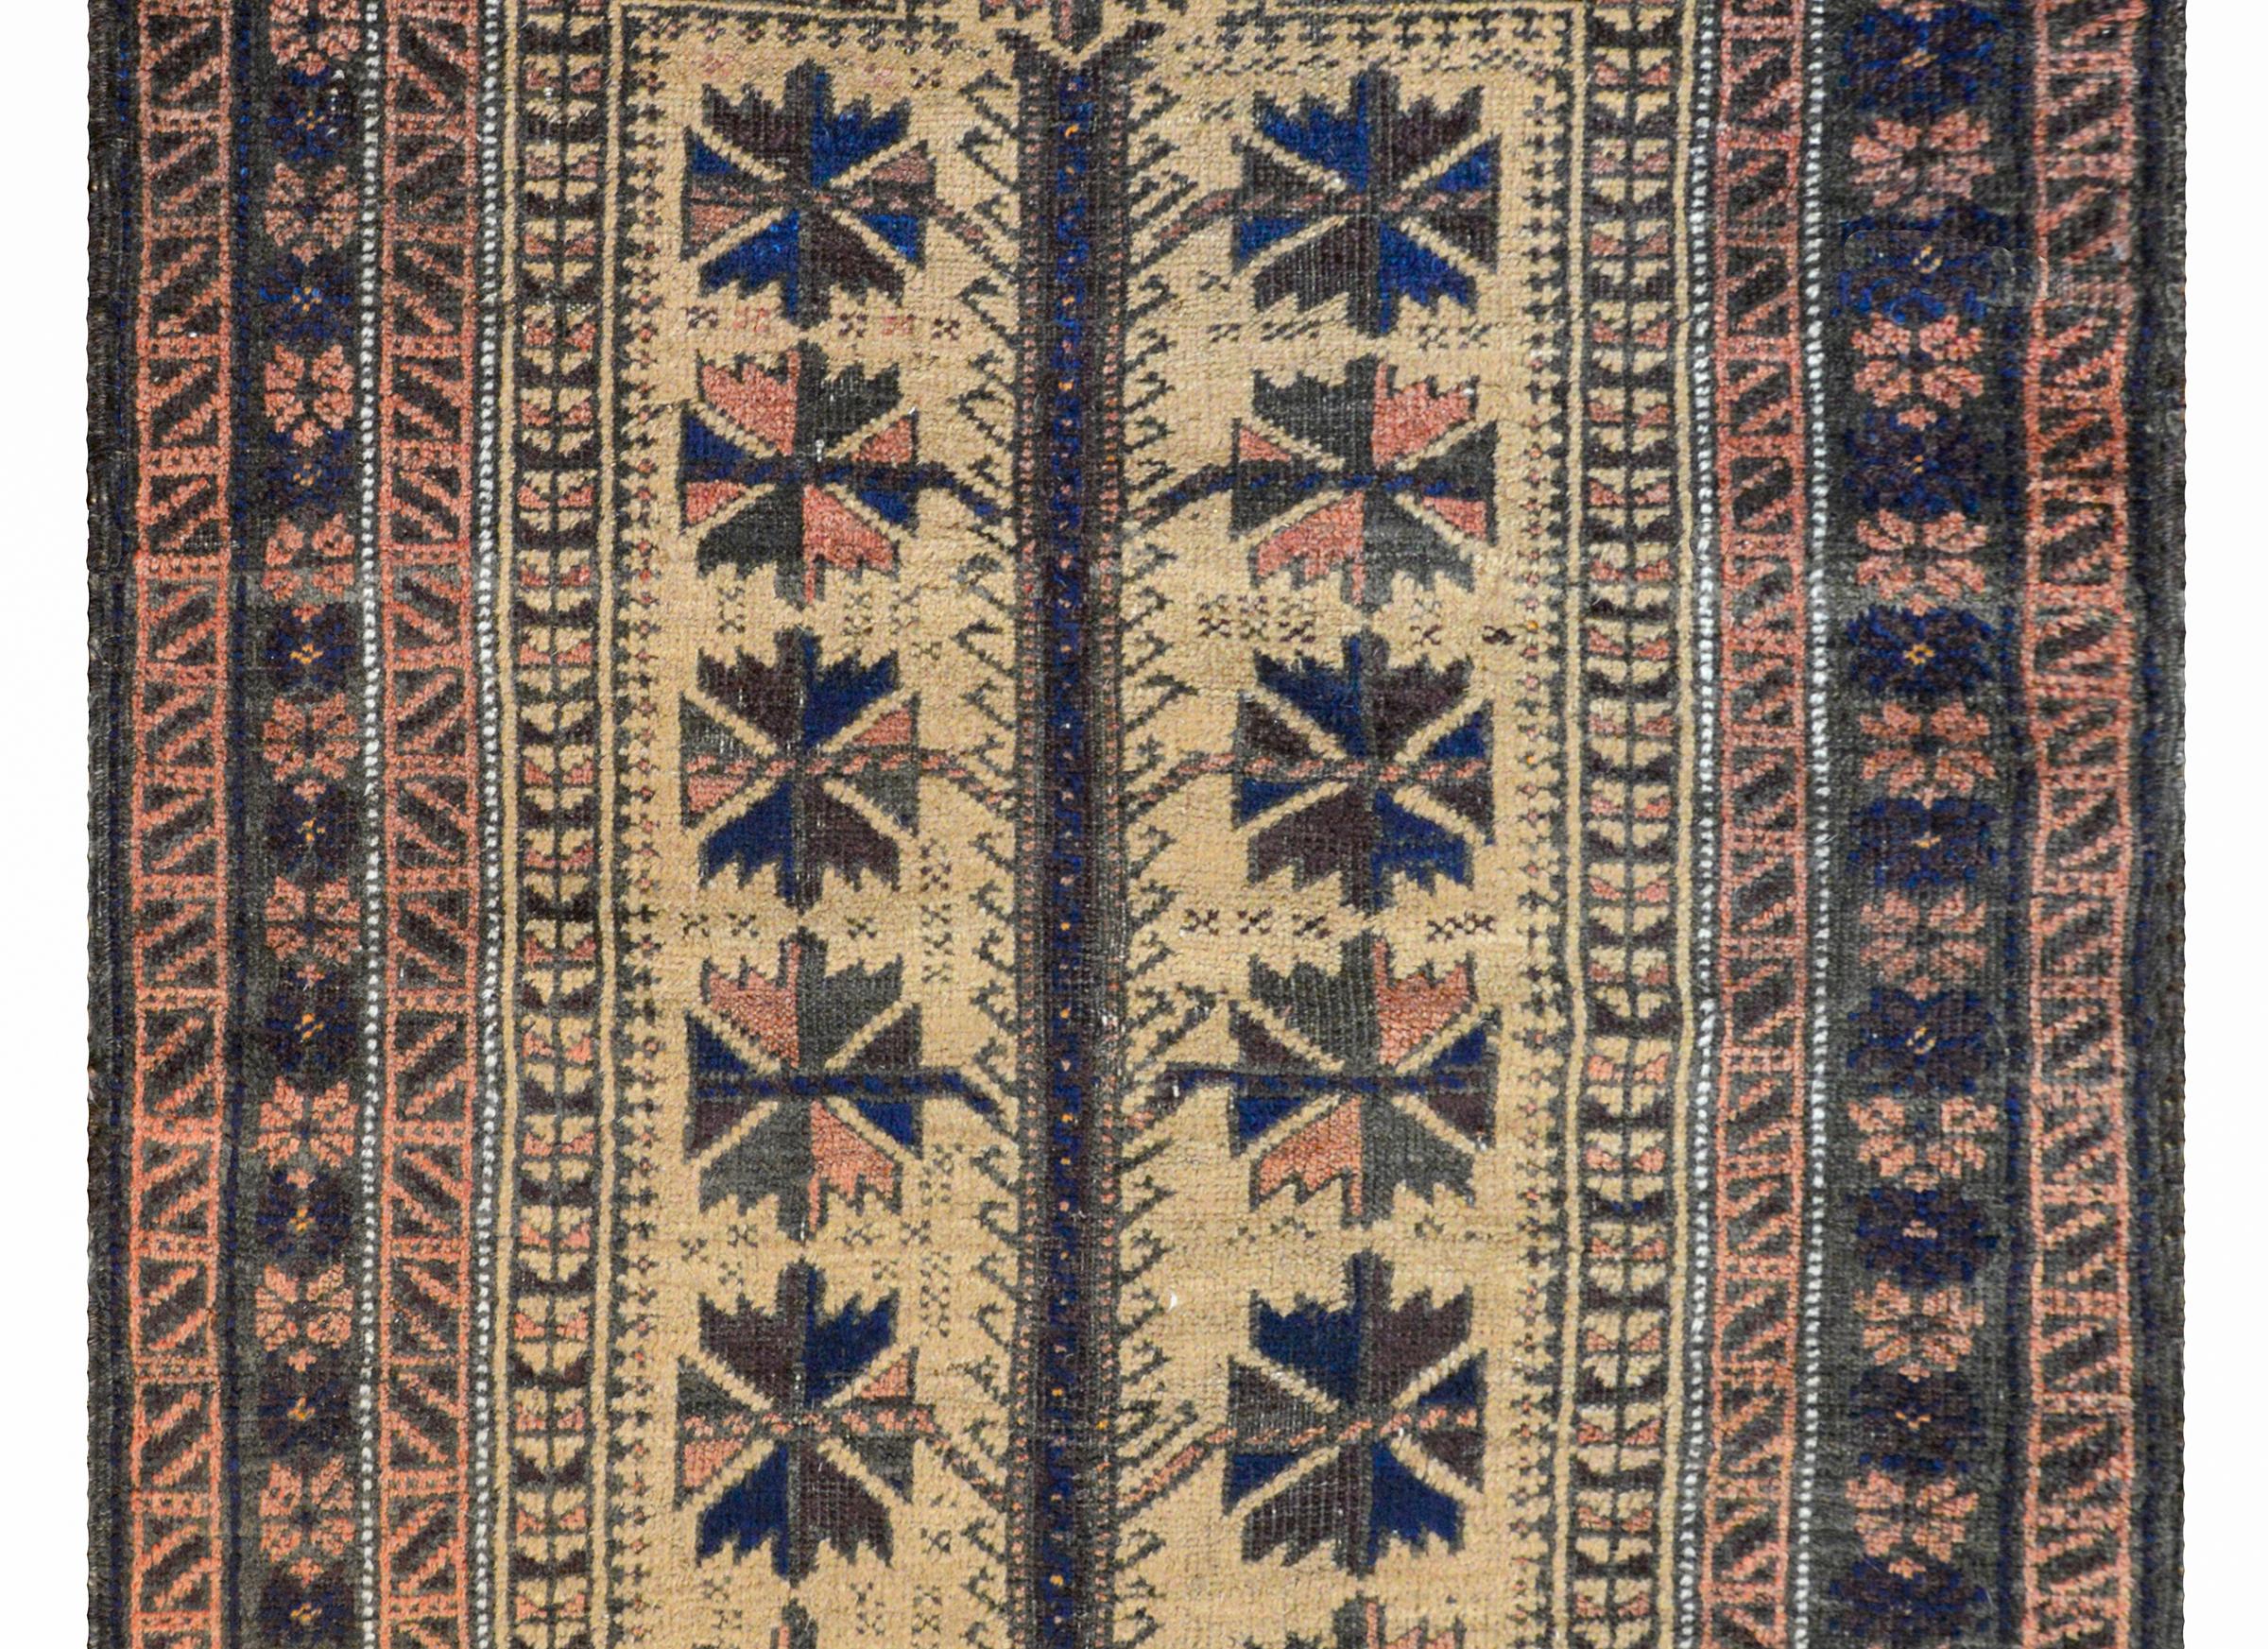 A fantastic early 20th century Persian Baluch prayer rug with a large-scale stylized floral pattern woven in brown, indigo, and pale red on a cream colored background. The border is composed with multiple geometric patterned stripes woven in similar